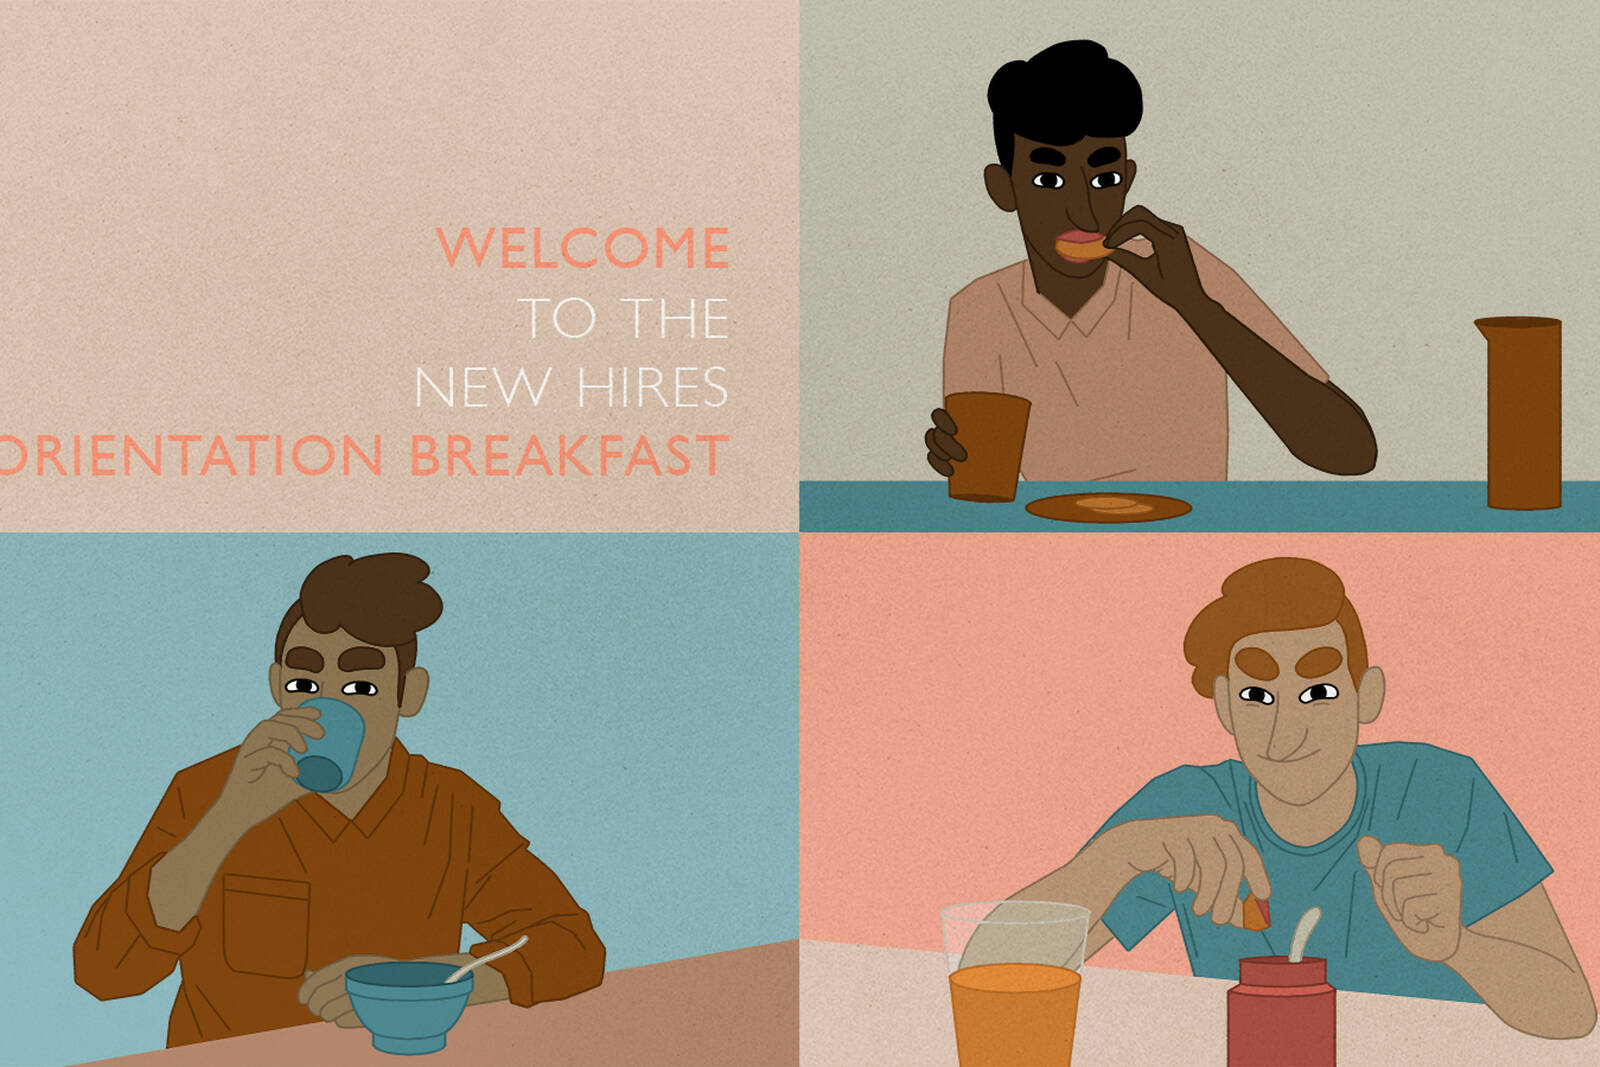 New hires attend a company's orientation breakfast